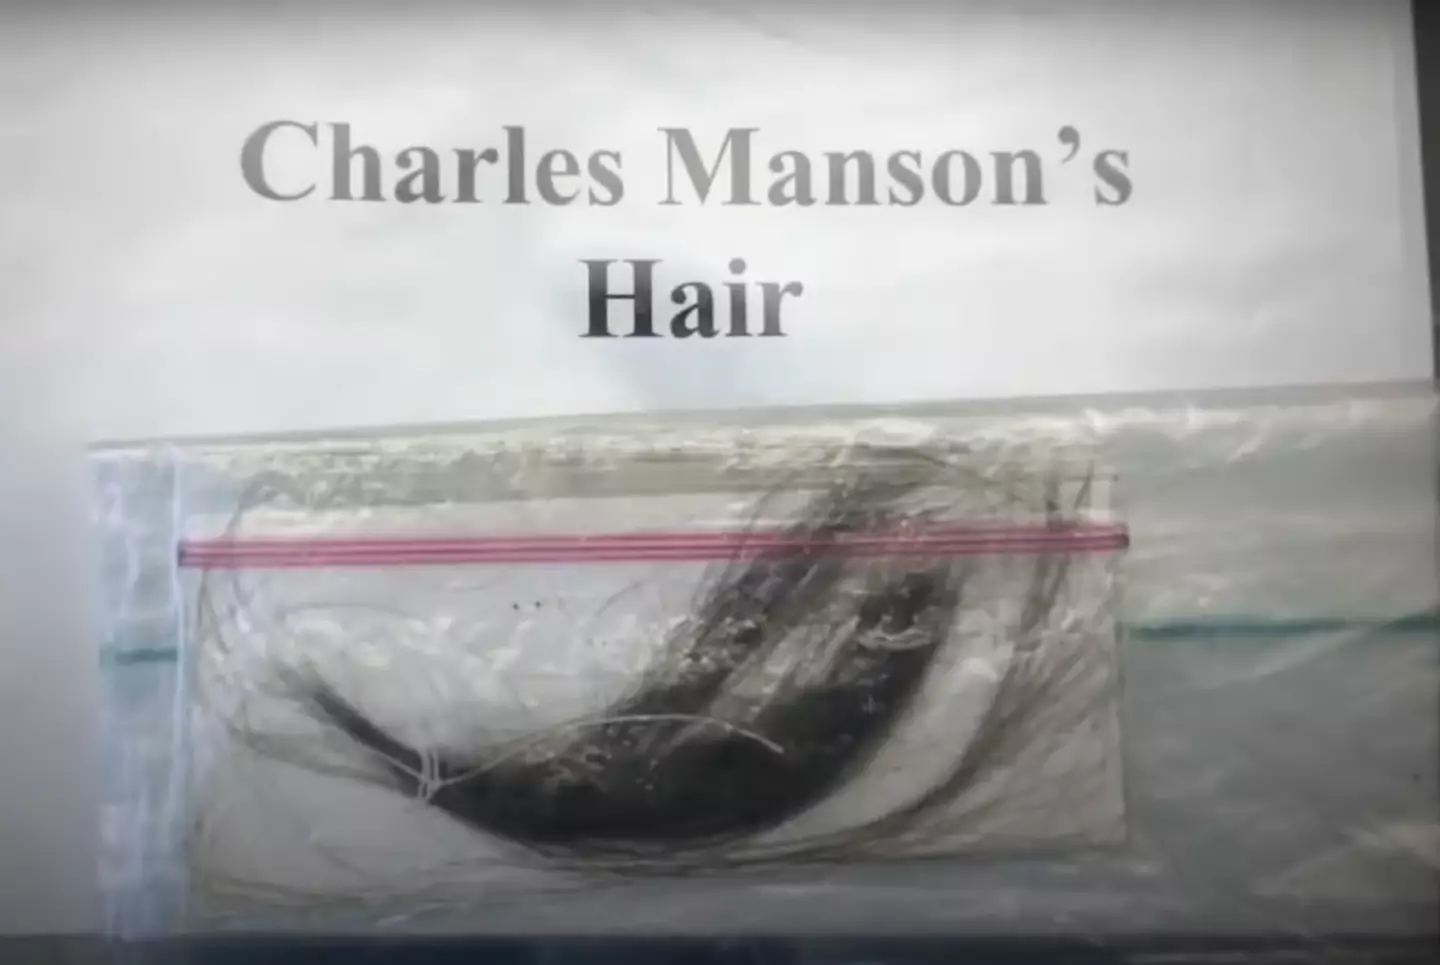 A lock of Charles Manson's hair has been put up for sale online.